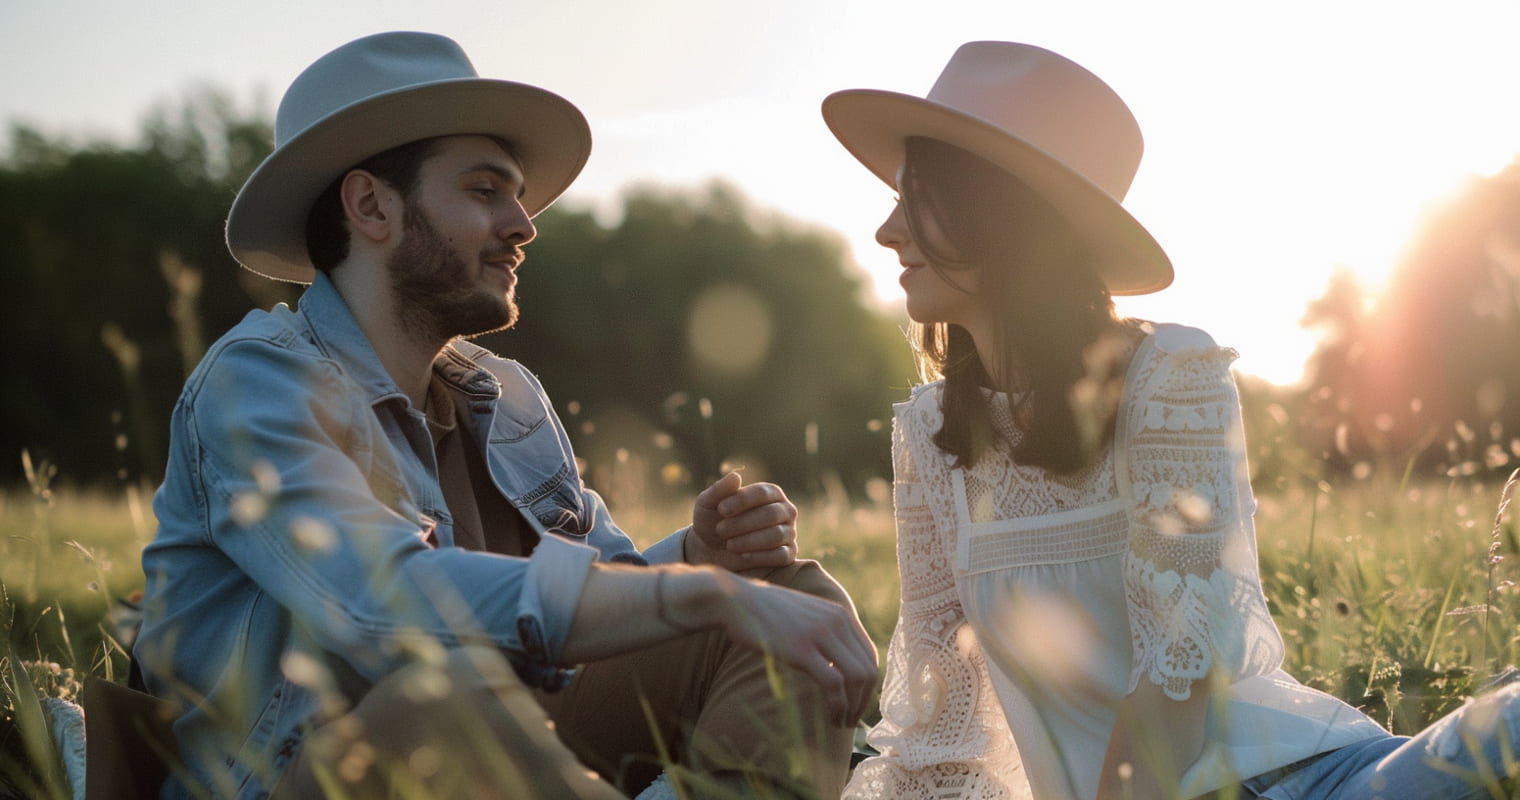 Young couple sitting in a sunlit meadow at sunset, both wearing stylish wide-brimmed hats, engaged in a tender conversation amidst the golden light.